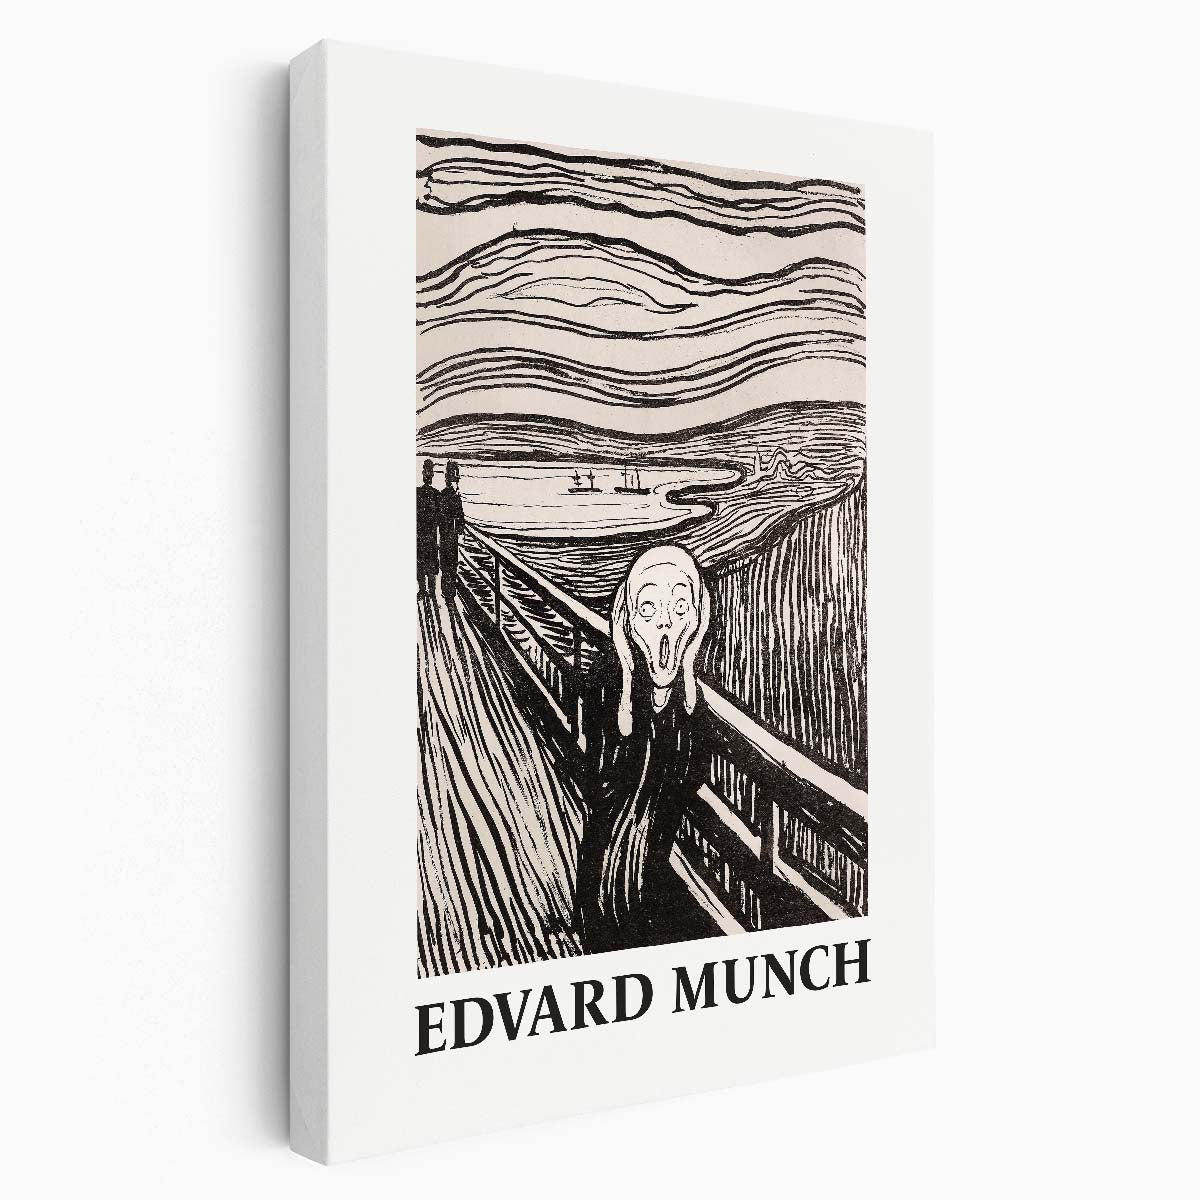 Edvard Munch Masterpiece The Scream Monochrome Acrylic Painting Poster by Luxuriance Designs, made in USA